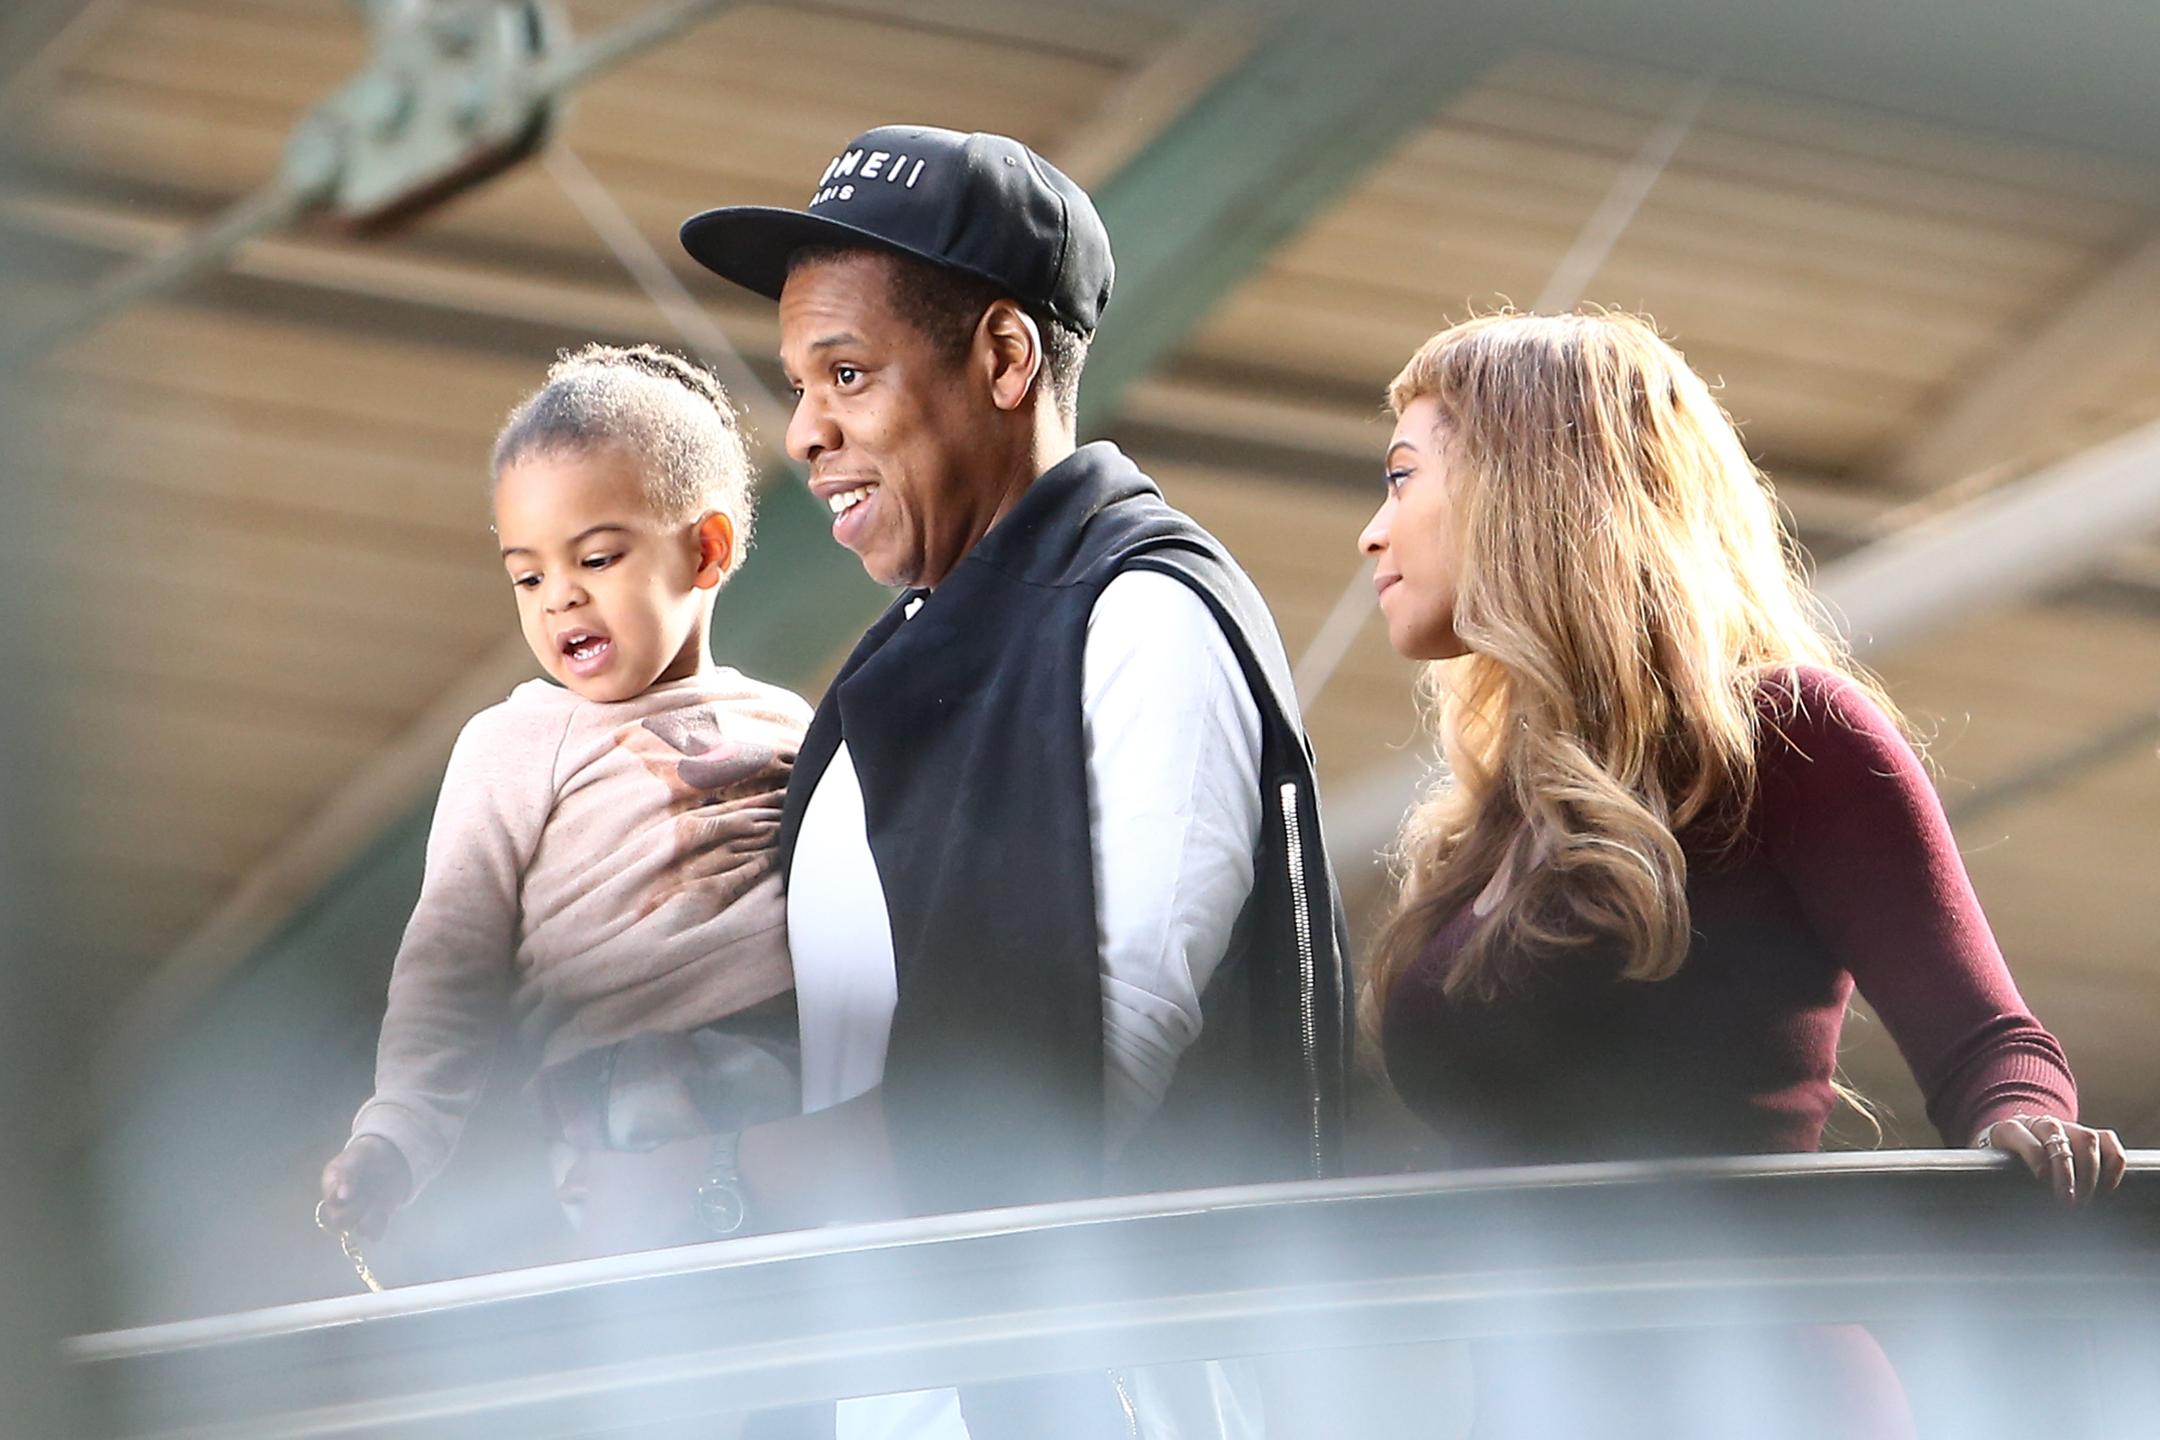 Find Out Why Parents At Blue Ivy’s School Are Complaining About Jay Z